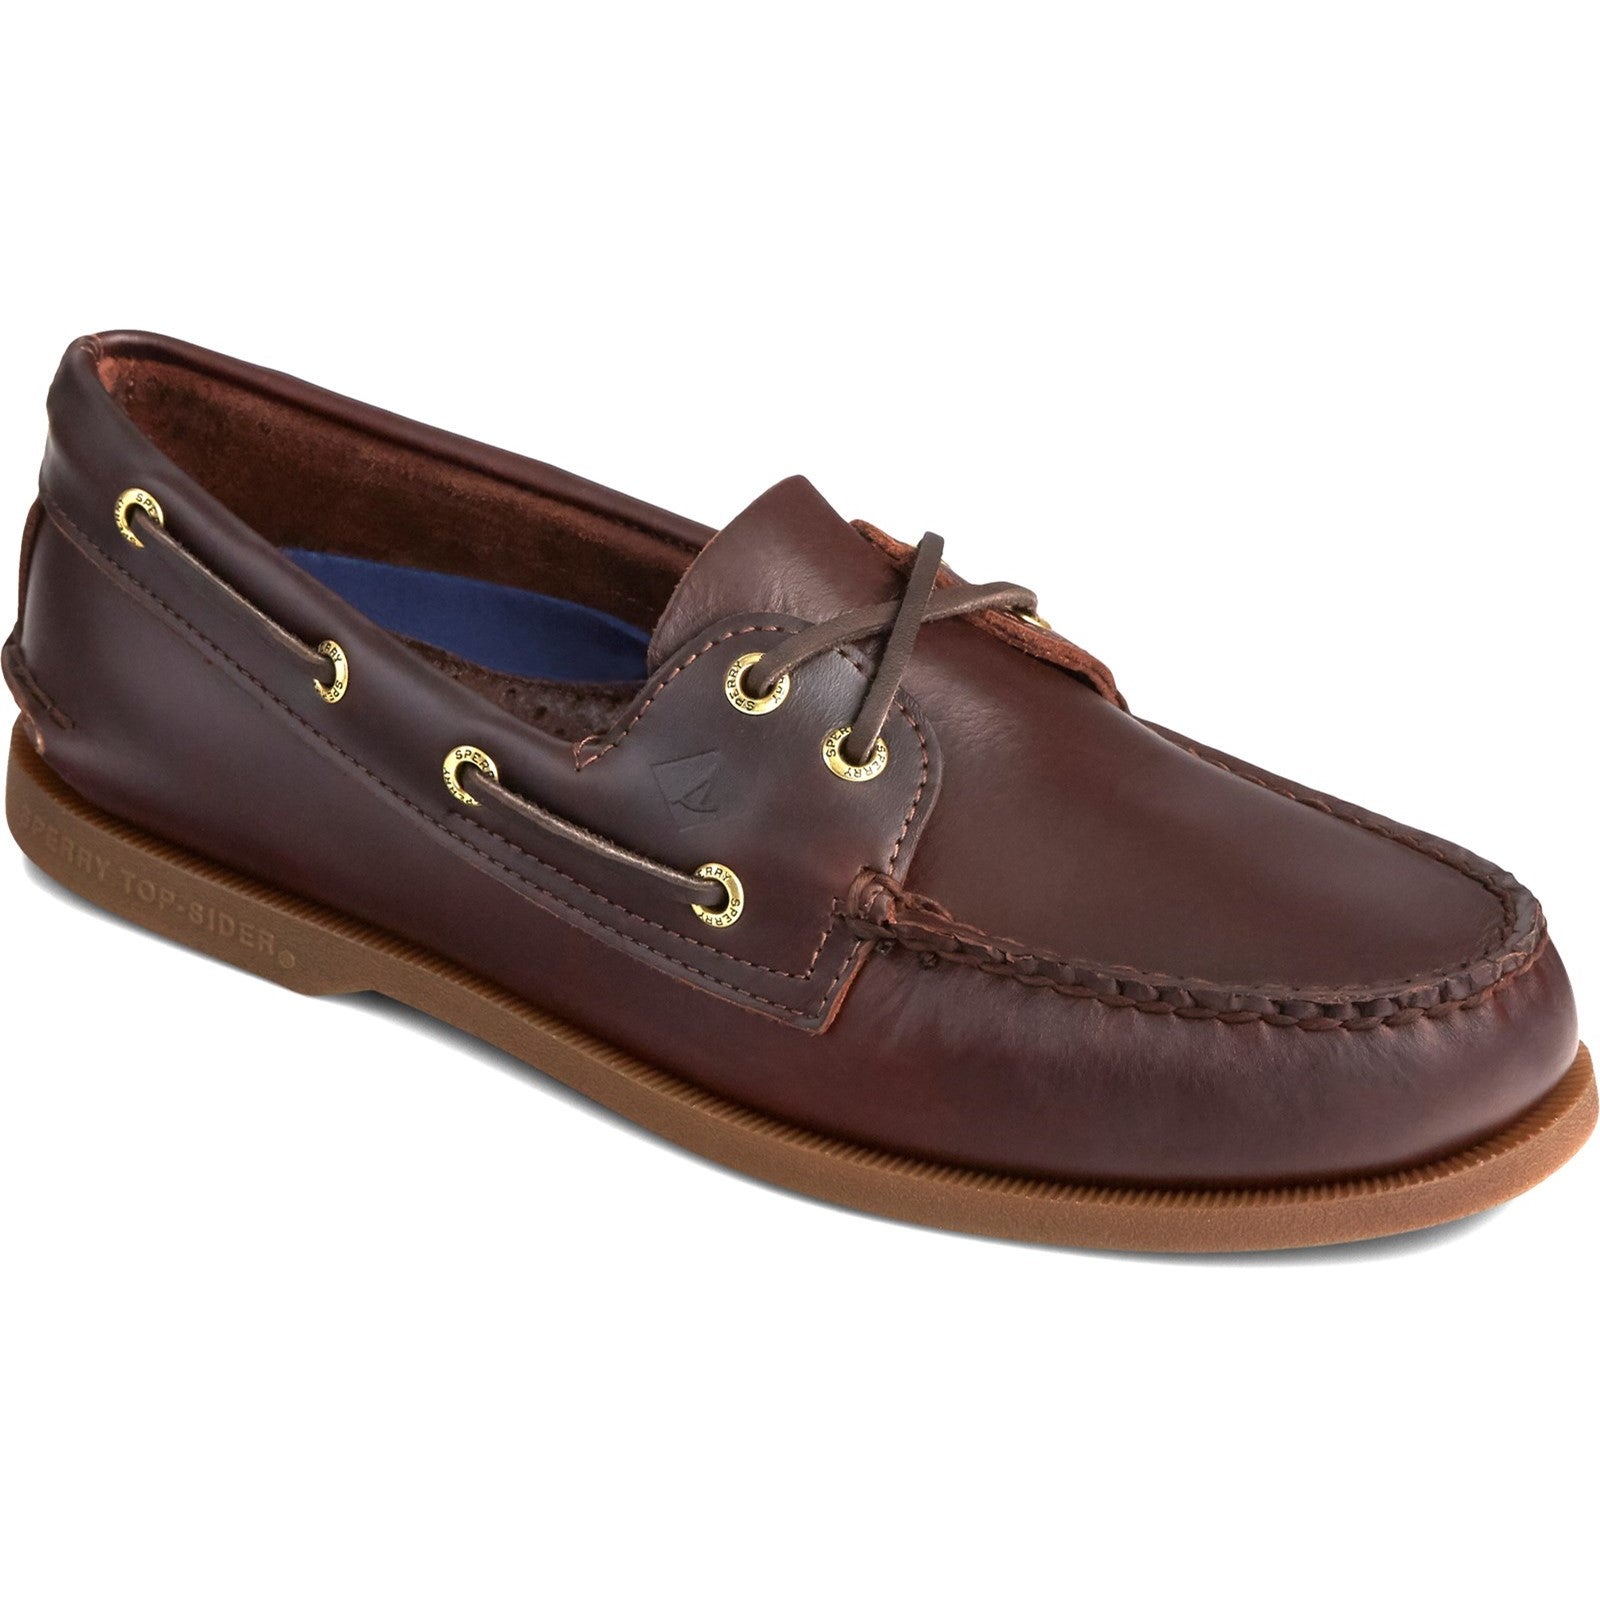 Sperry Mens Authentic Original Leather Boat Shoes - Bronze